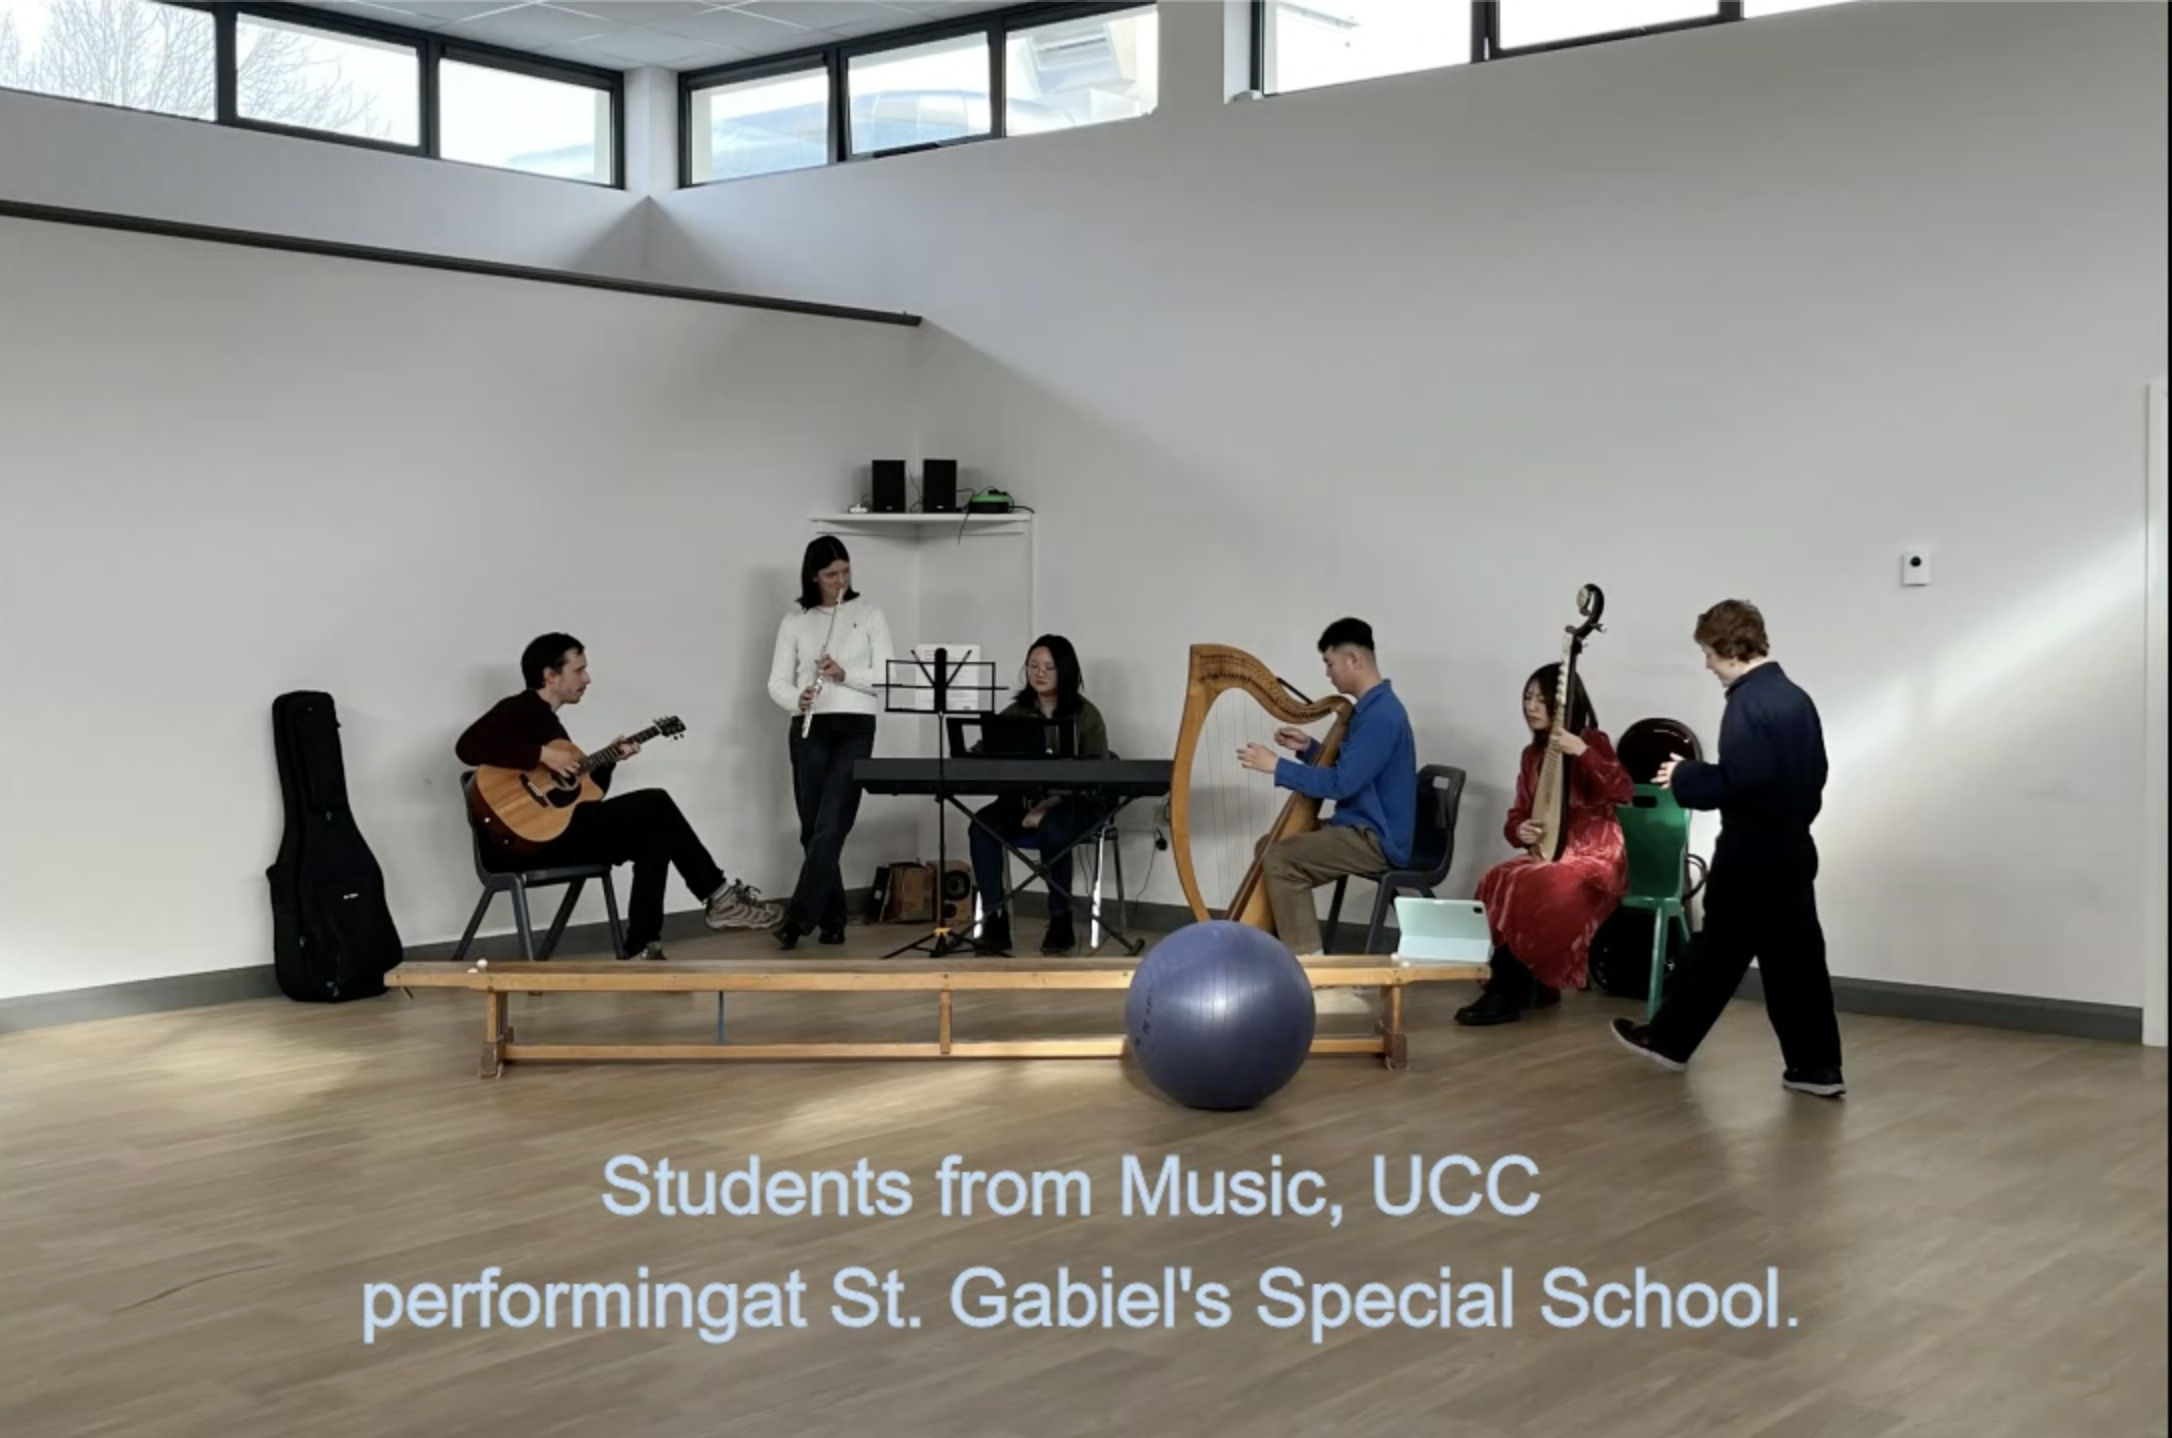 UCC Music community outreach at St Gabriel's Special School